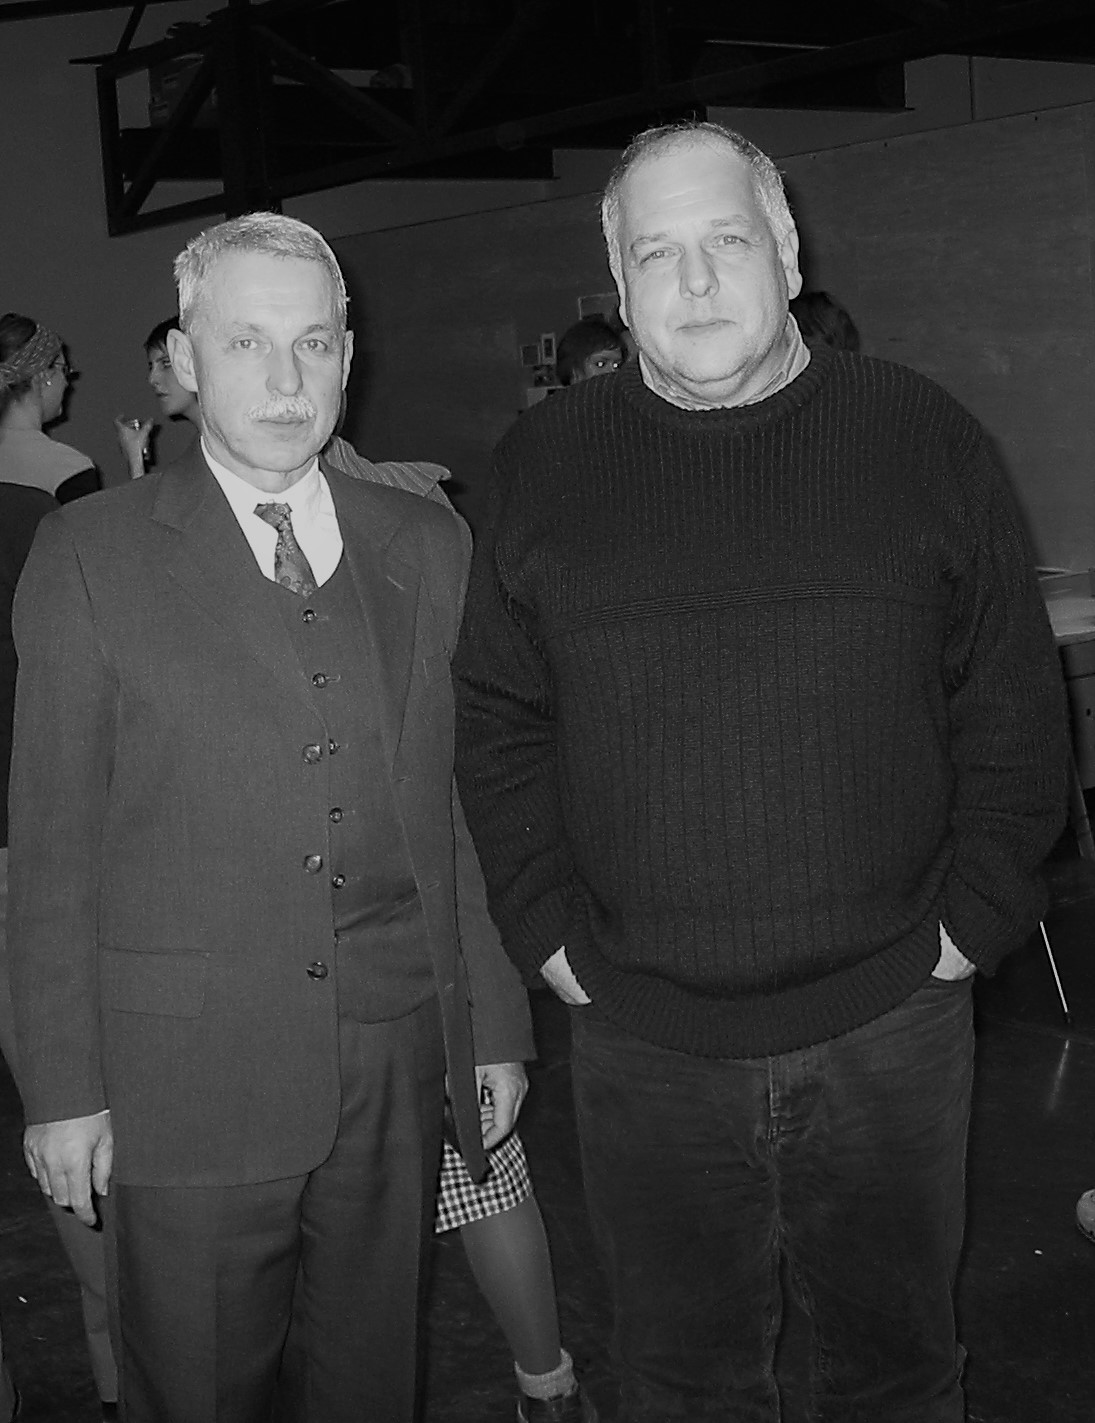 Prof. Vojtěch Konopa (left) in a joint photo with the first director of CXI doc. Petr Tuma